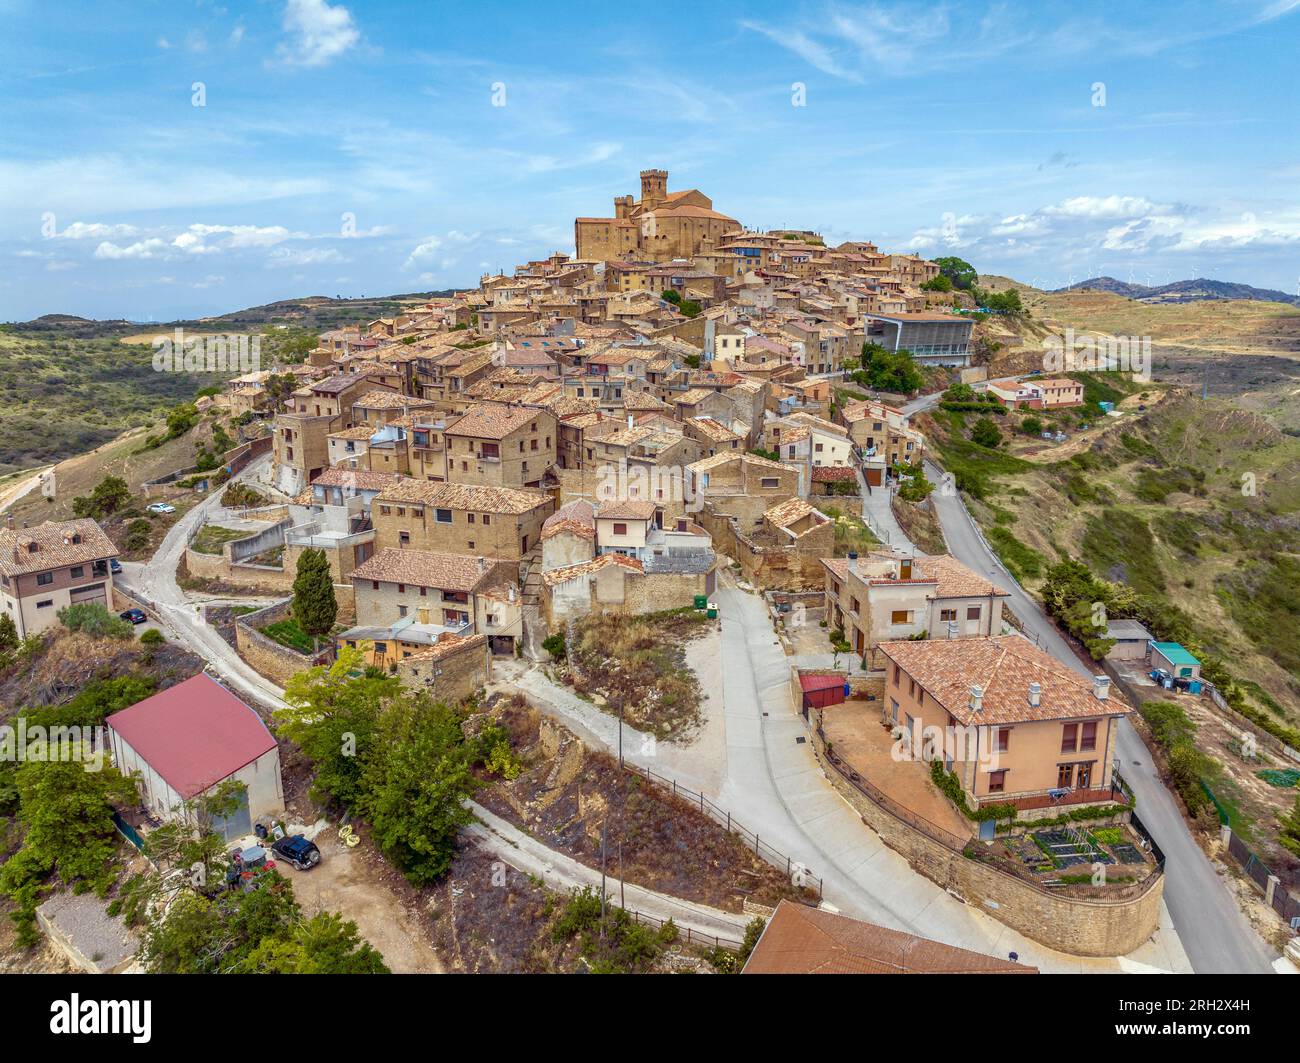 Aerial view of the hilltop medieval village of Ujue in Navarra, northern Spain on ancient pilgrim route Camino de Santiago or Way of St James. Nominat Stock Photo